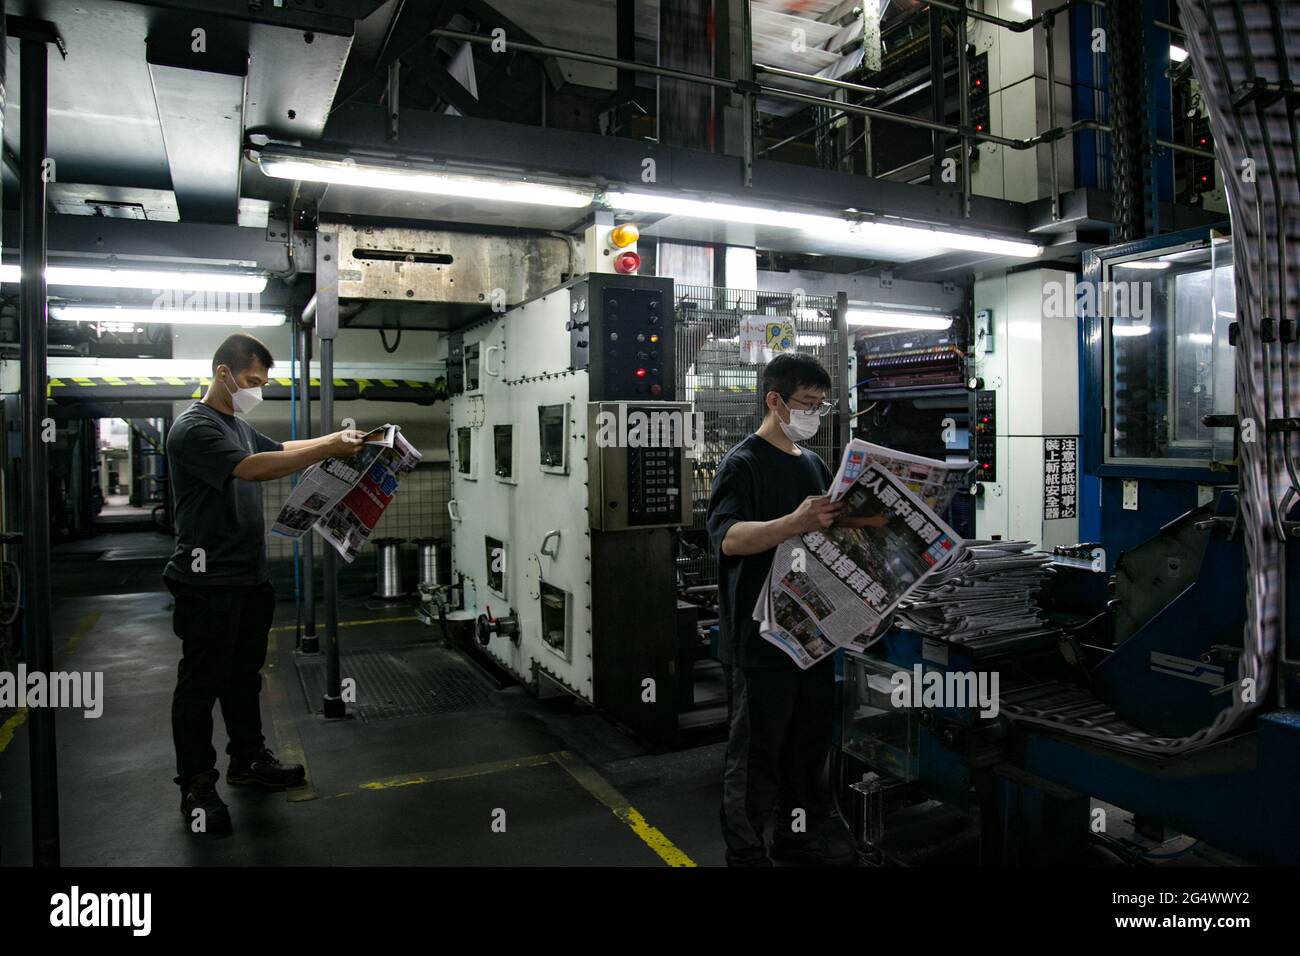 Hong Kong, China. 24th June, 2021. Apple daily workers checking the newspaper printing.Hong Kong's largest pro-democracy newspaper, Apple Daily, is shutting down after printing its final edition on 25/6/2021 and it raises huge concern on the freedom of press in Hong Kong. National security police raided its offices, freezing its assets and accounts, crippling the company and forcing its demise. Credit: SOPA Images Limited/Alamy Live News Stock Photo